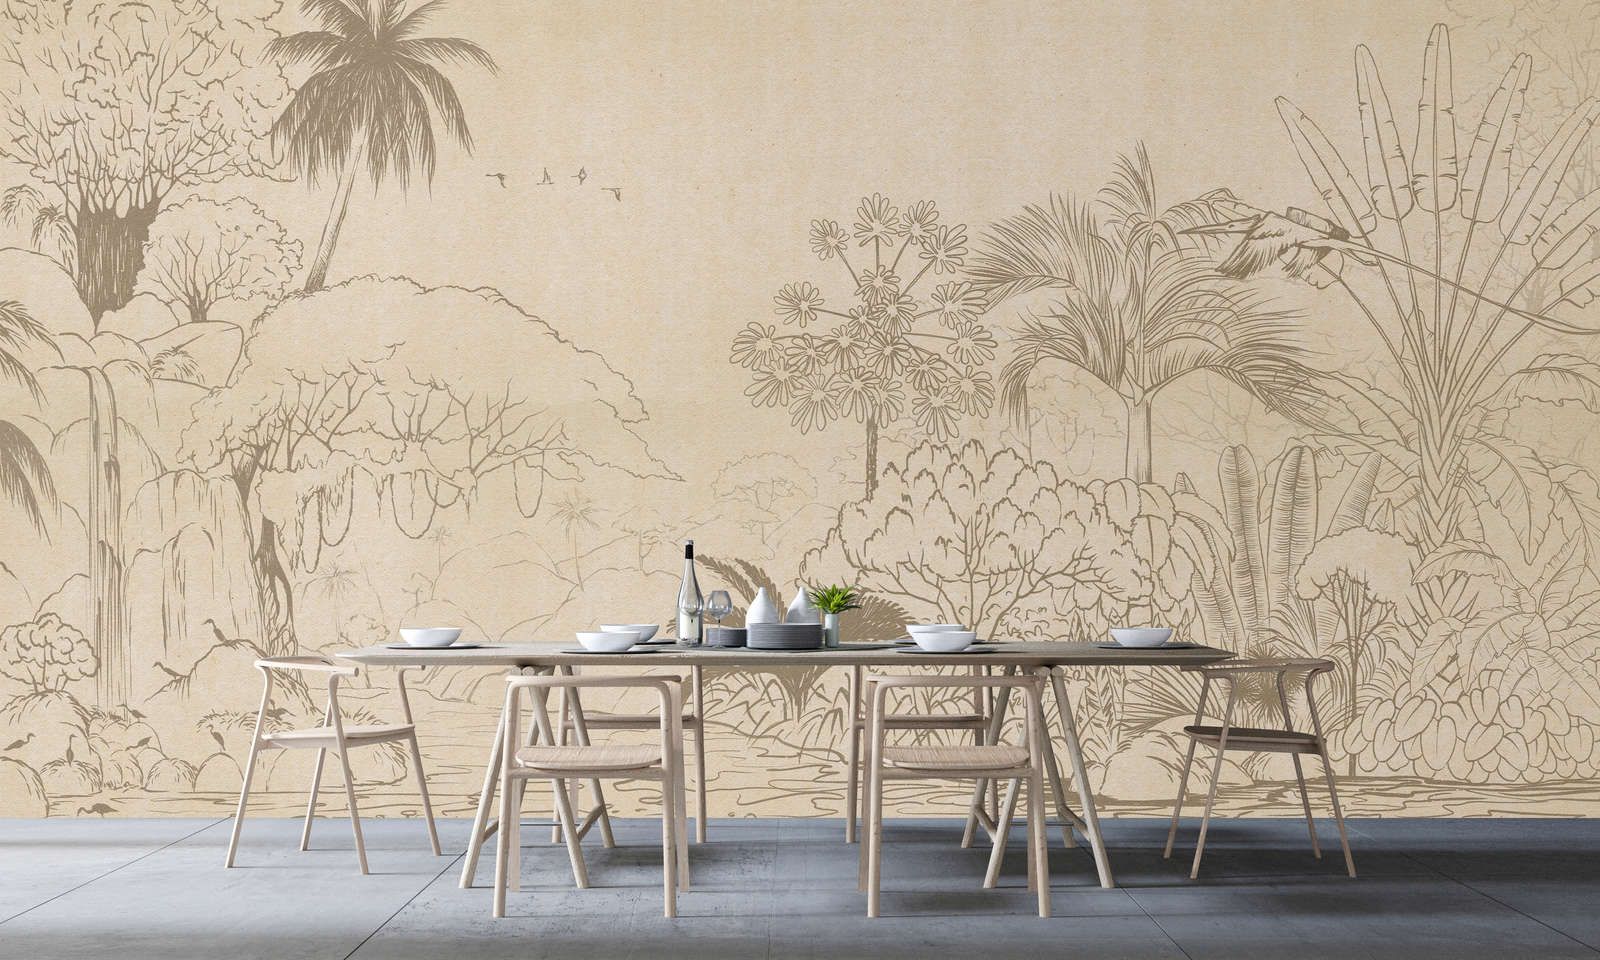             Photo wallpaper »oasis« - Jungle in drawing style with handmade paper look - Smooth, slightly pearlescent non-woven fabric
        